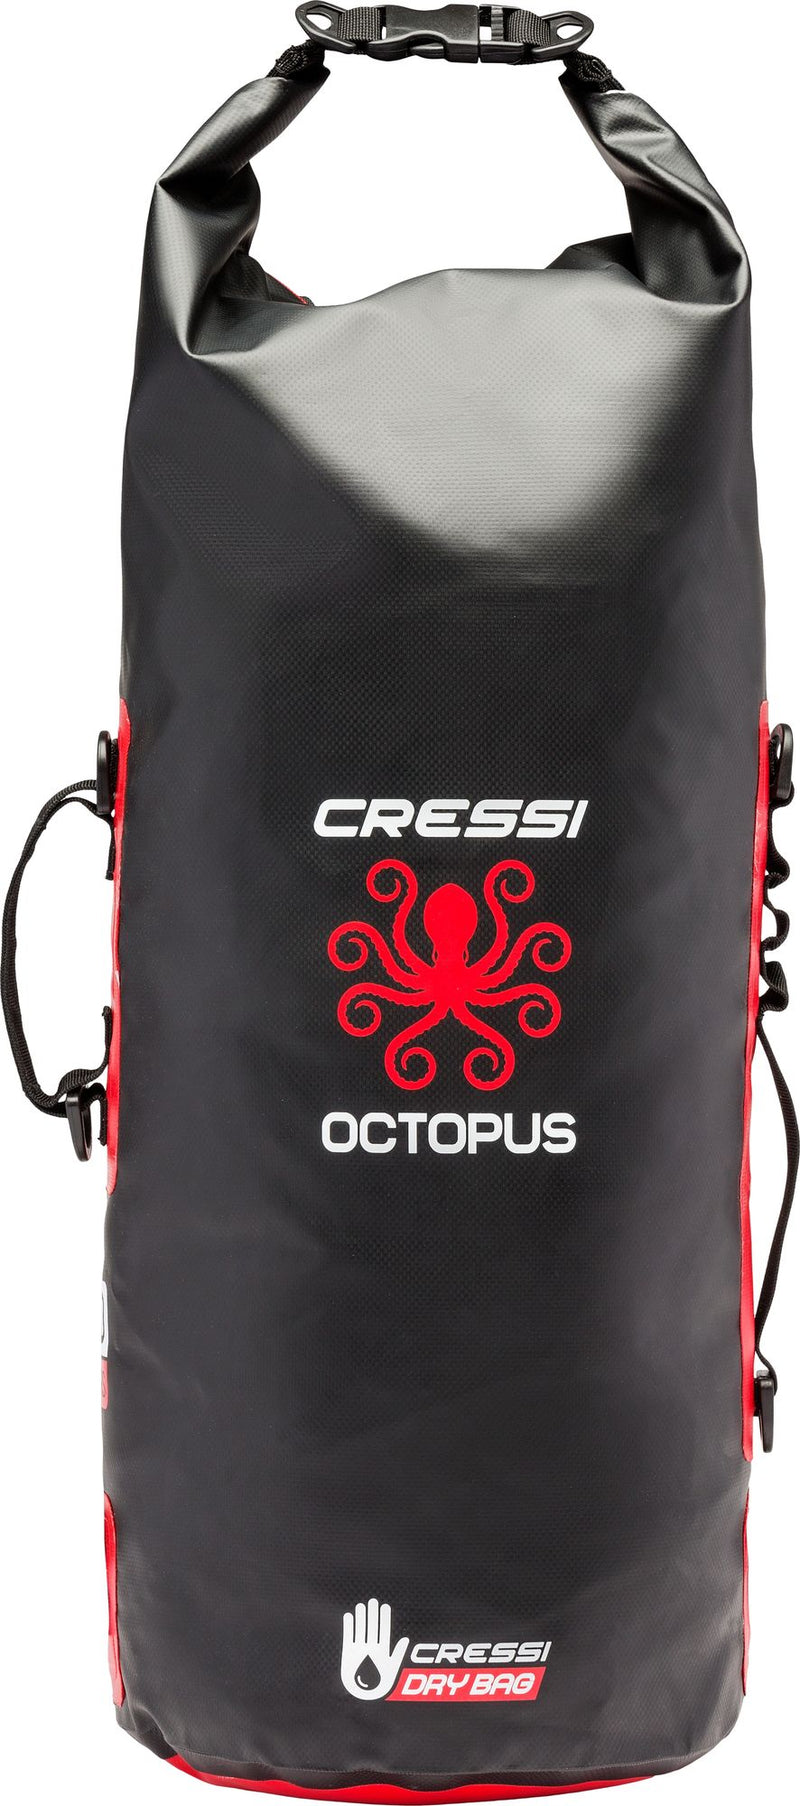 Octopus Dry Backpack - Cressi